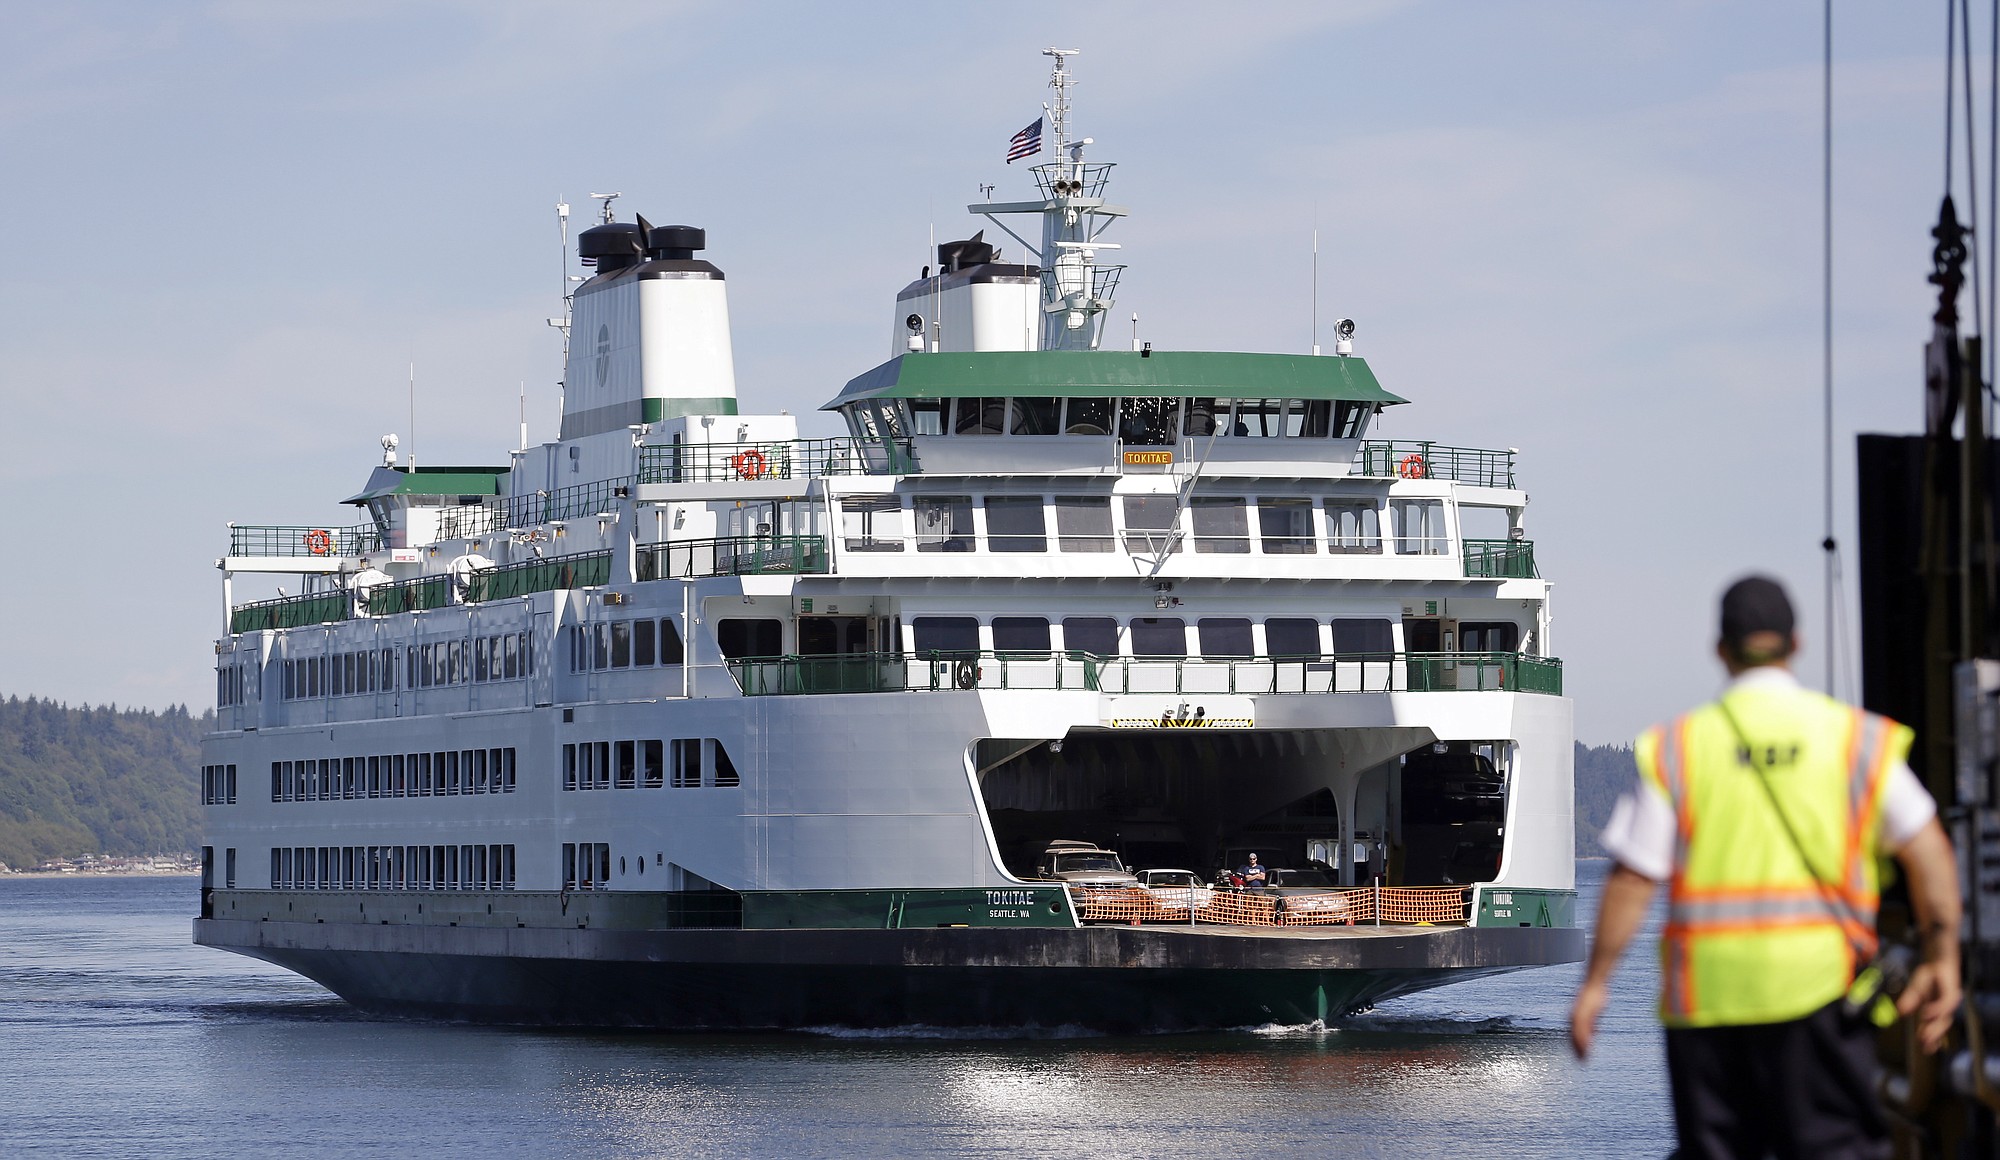 The Tokitae, Washington's newest ferry, heads into the dock on a run from Clinton, Wash., Tuesday, July 1, 2014, in Mukilteo, Wash. After a two week delay for additional crew training, the Tokitae entered service about noon Monday on the busy Mukilteo-Clinton run, but had a problem with some cars scraping bottom on the edge of ramps. Tuesday, a small hydraulic leak forced it to cancel its first round trip of the morning for repairs and a sea trial. To avoid the scraping, crews are now sorting vehicles by size and weight and direct them either to the main deck or side ramps.